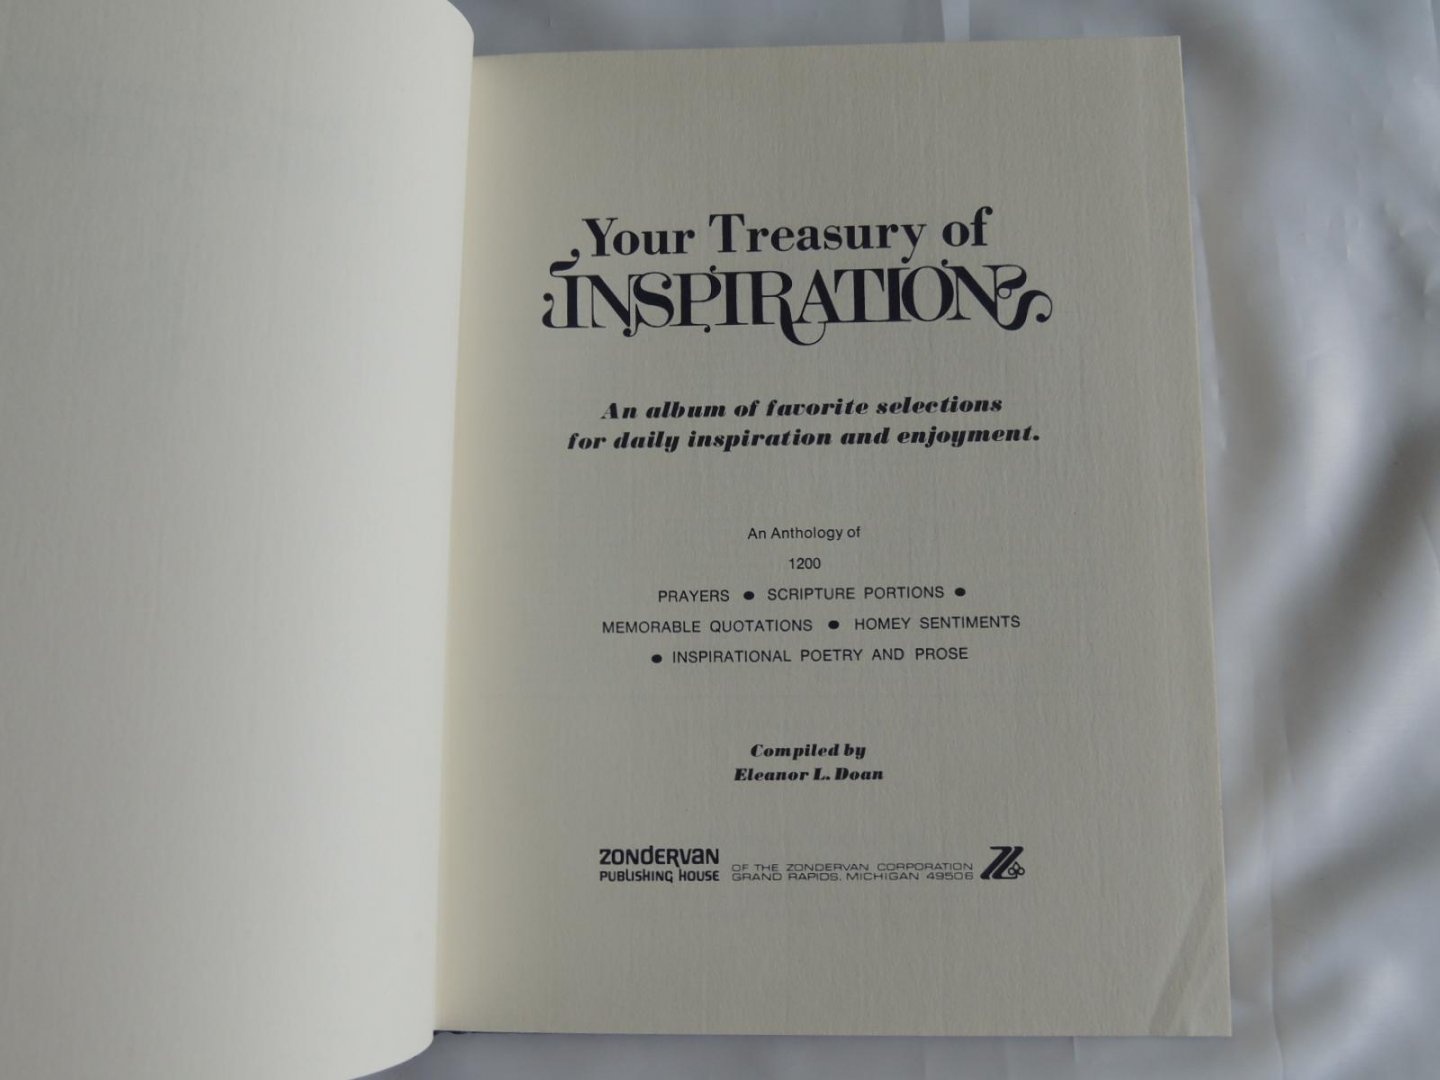 Eleanor L Doan - Your treasury of inspiration : an album of favorite selections for daily inspiration and enjoyment : an anthology of 1200 prayers, scripture portions, memorable quotations, homey sentiments, inspirational poetry and prose